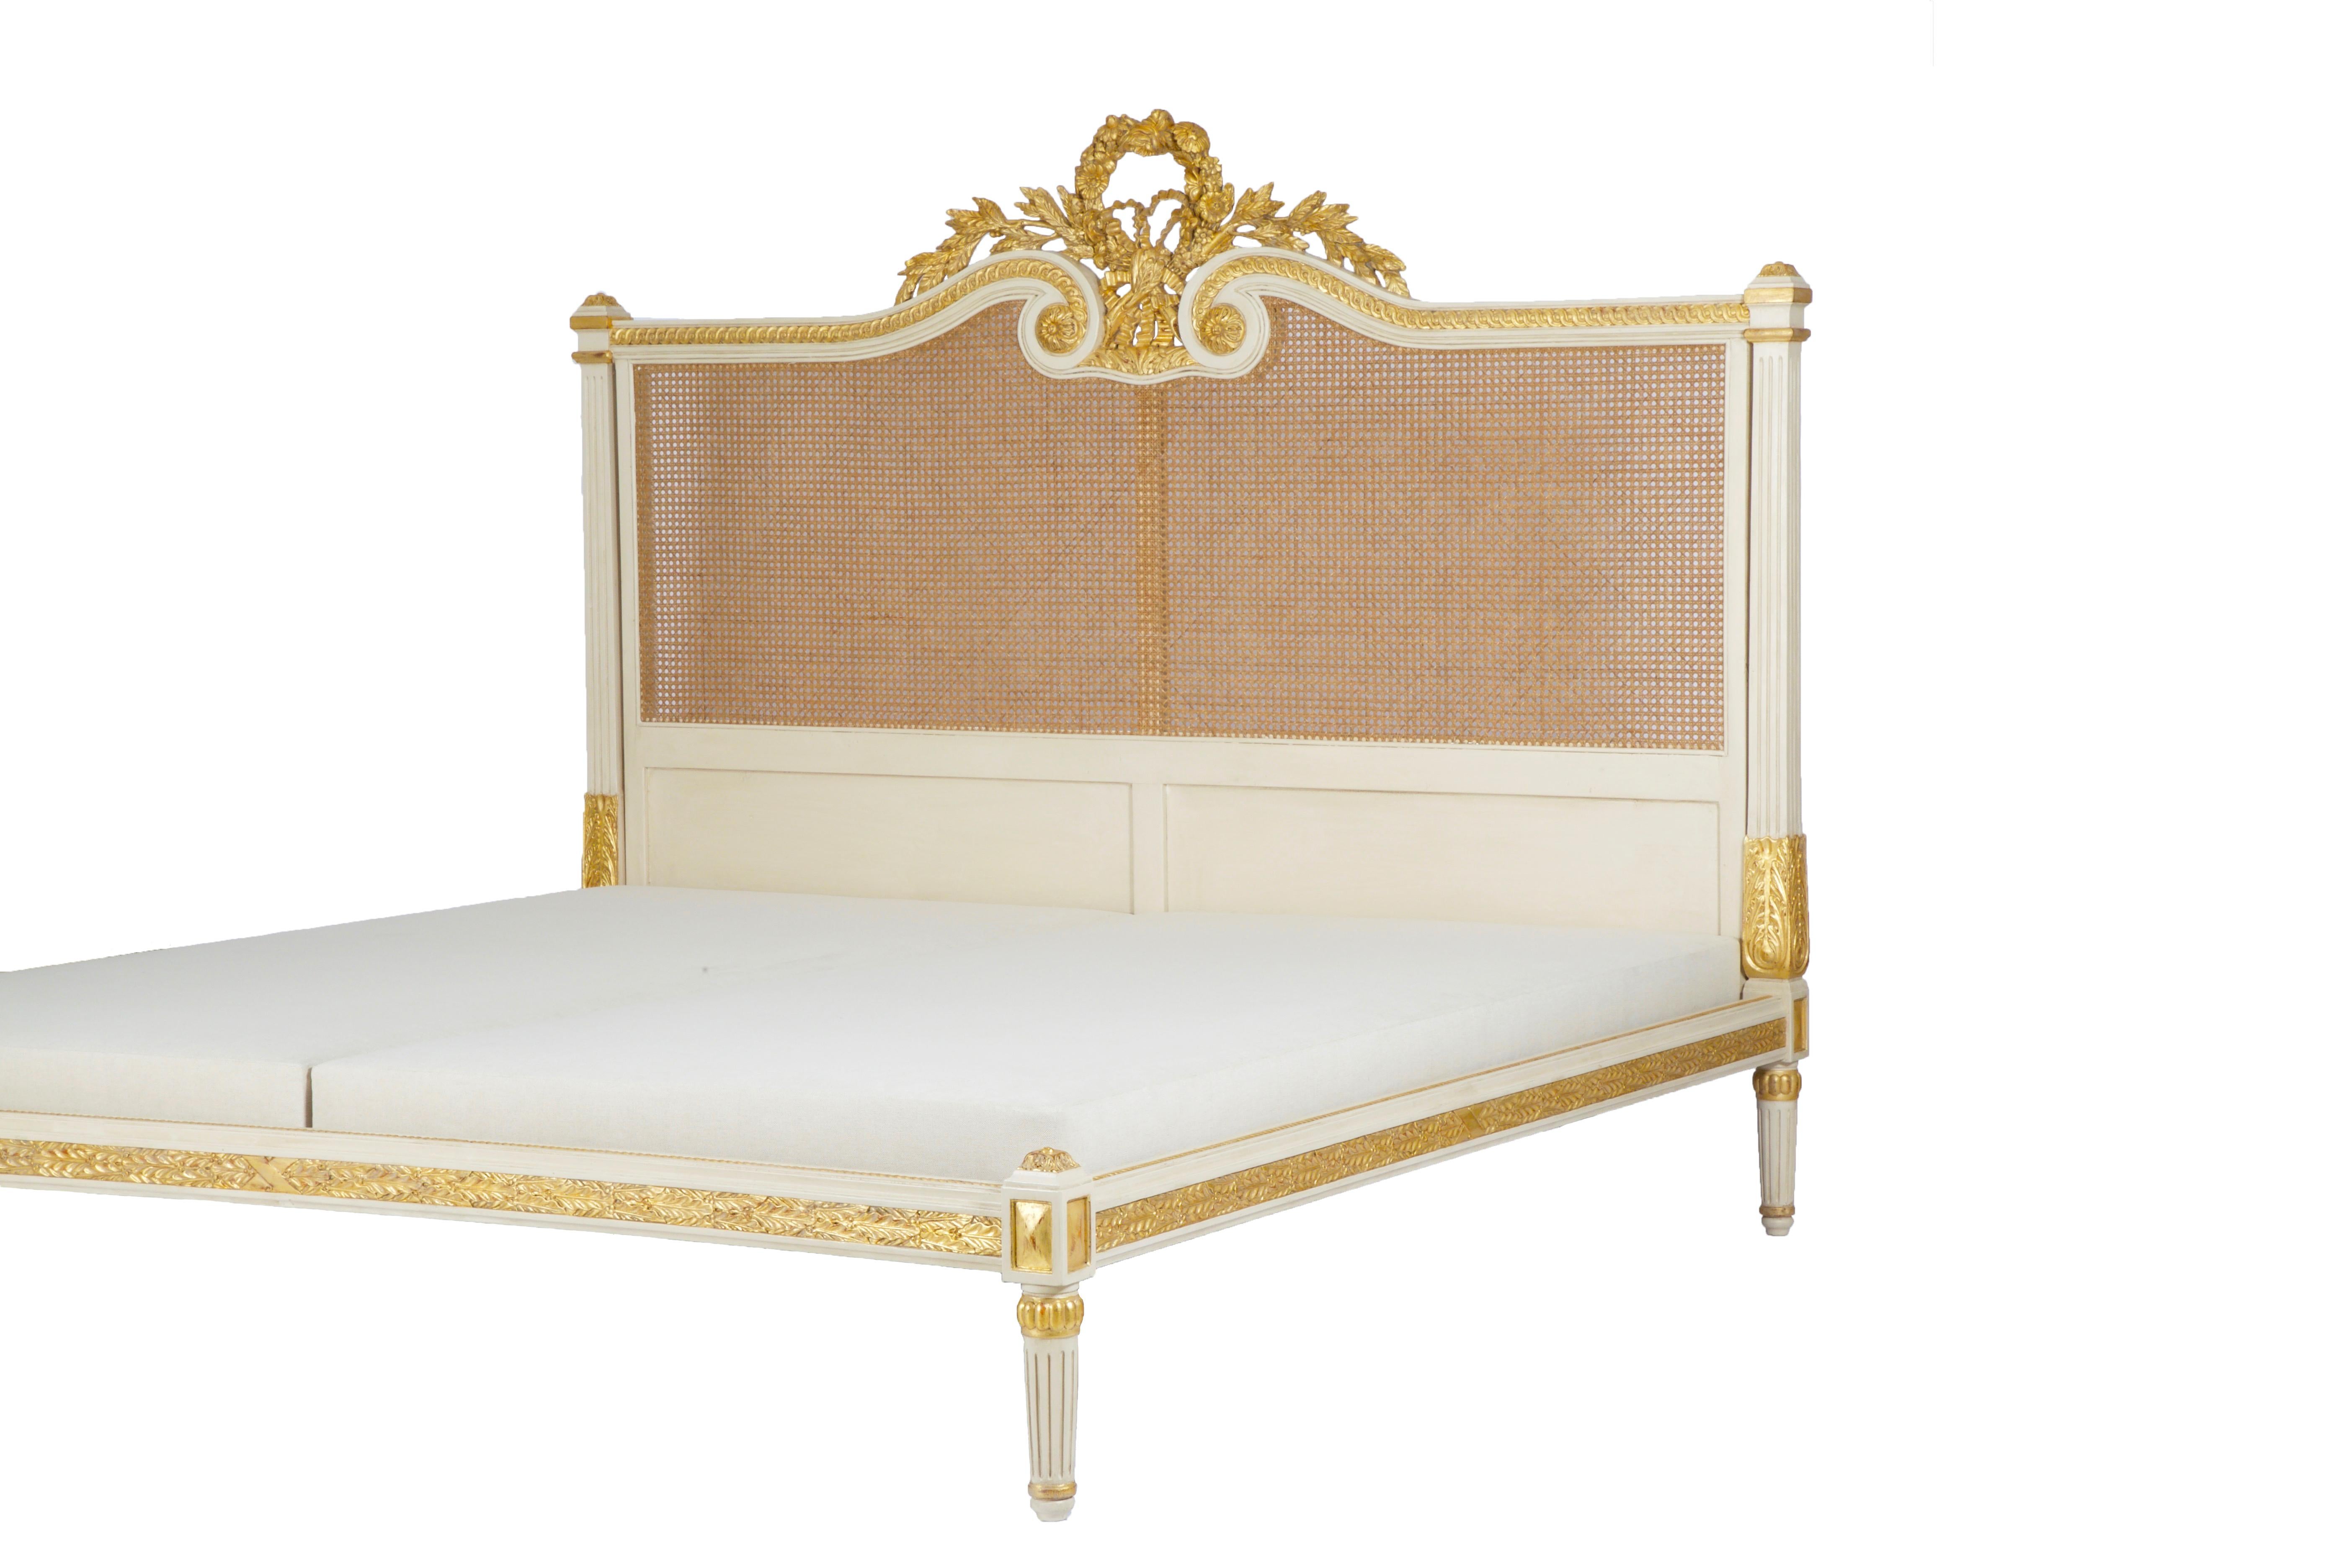 The Rosace bed is an elegant example of the French LXVI style, with its classic columns and restrained ornamentation the bedstead stands tall and exudes a noble confidence. The apex of the headboard has a meticulously carved rosace which is flanked